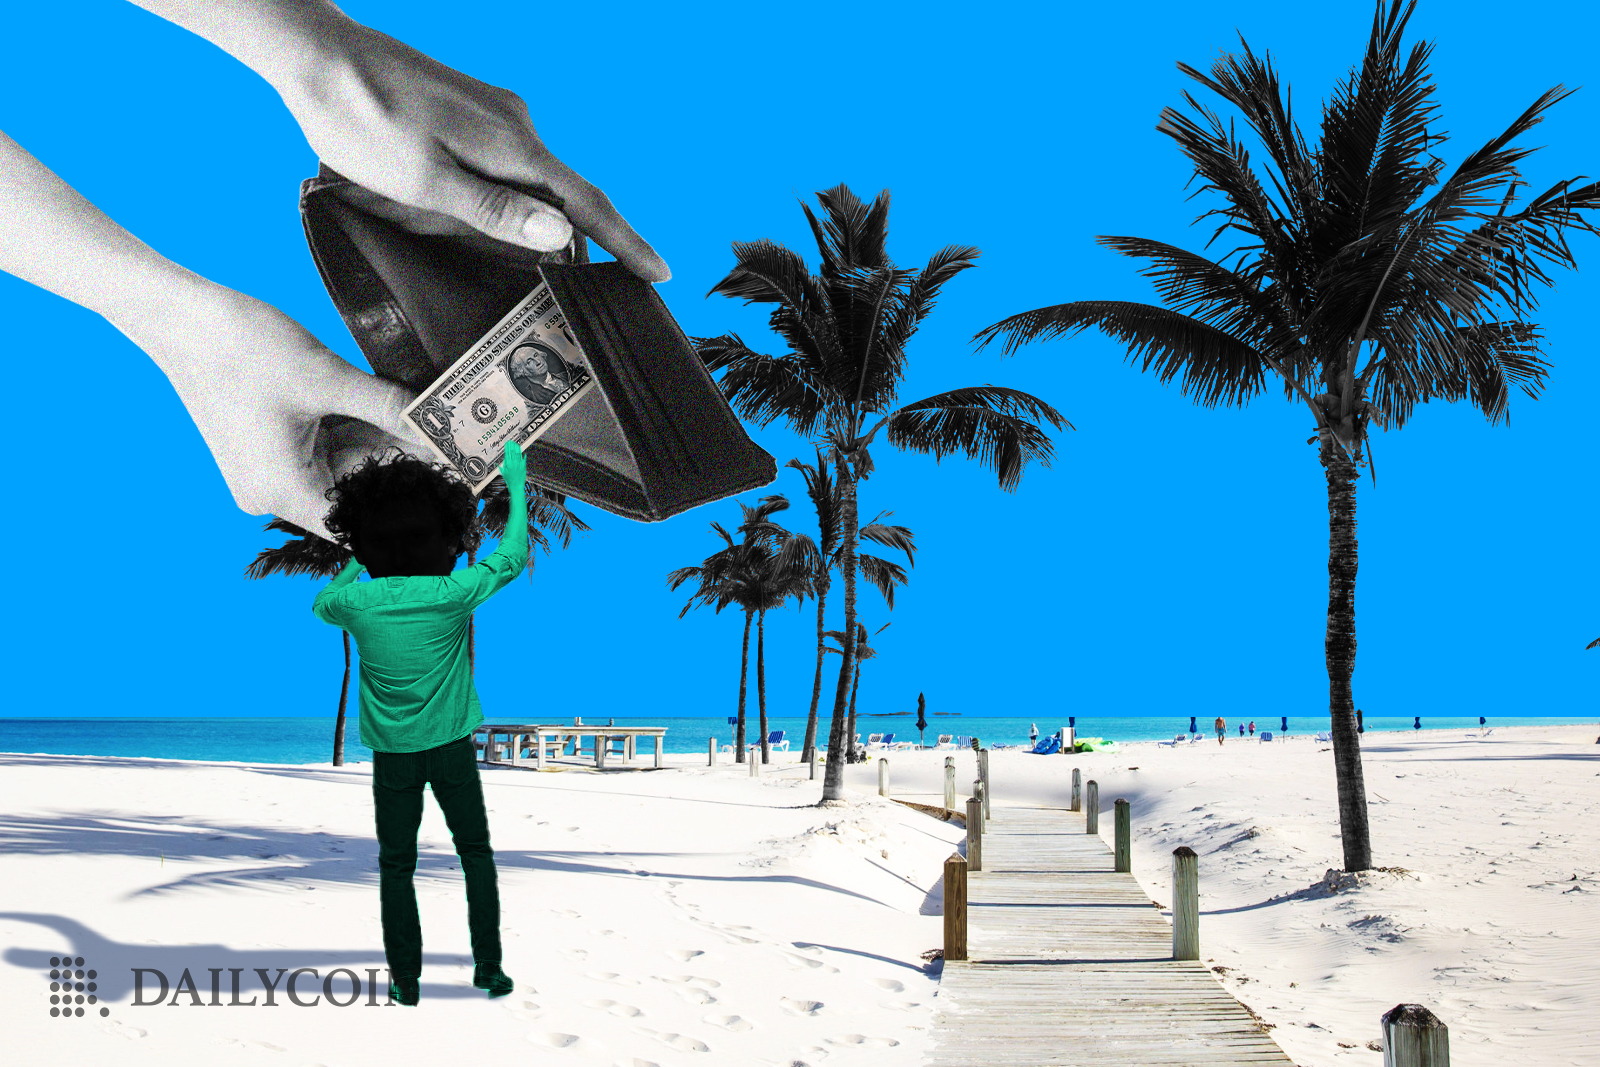 A person is giving a dollar to a huge hands holding a wallet above at a beach with palms